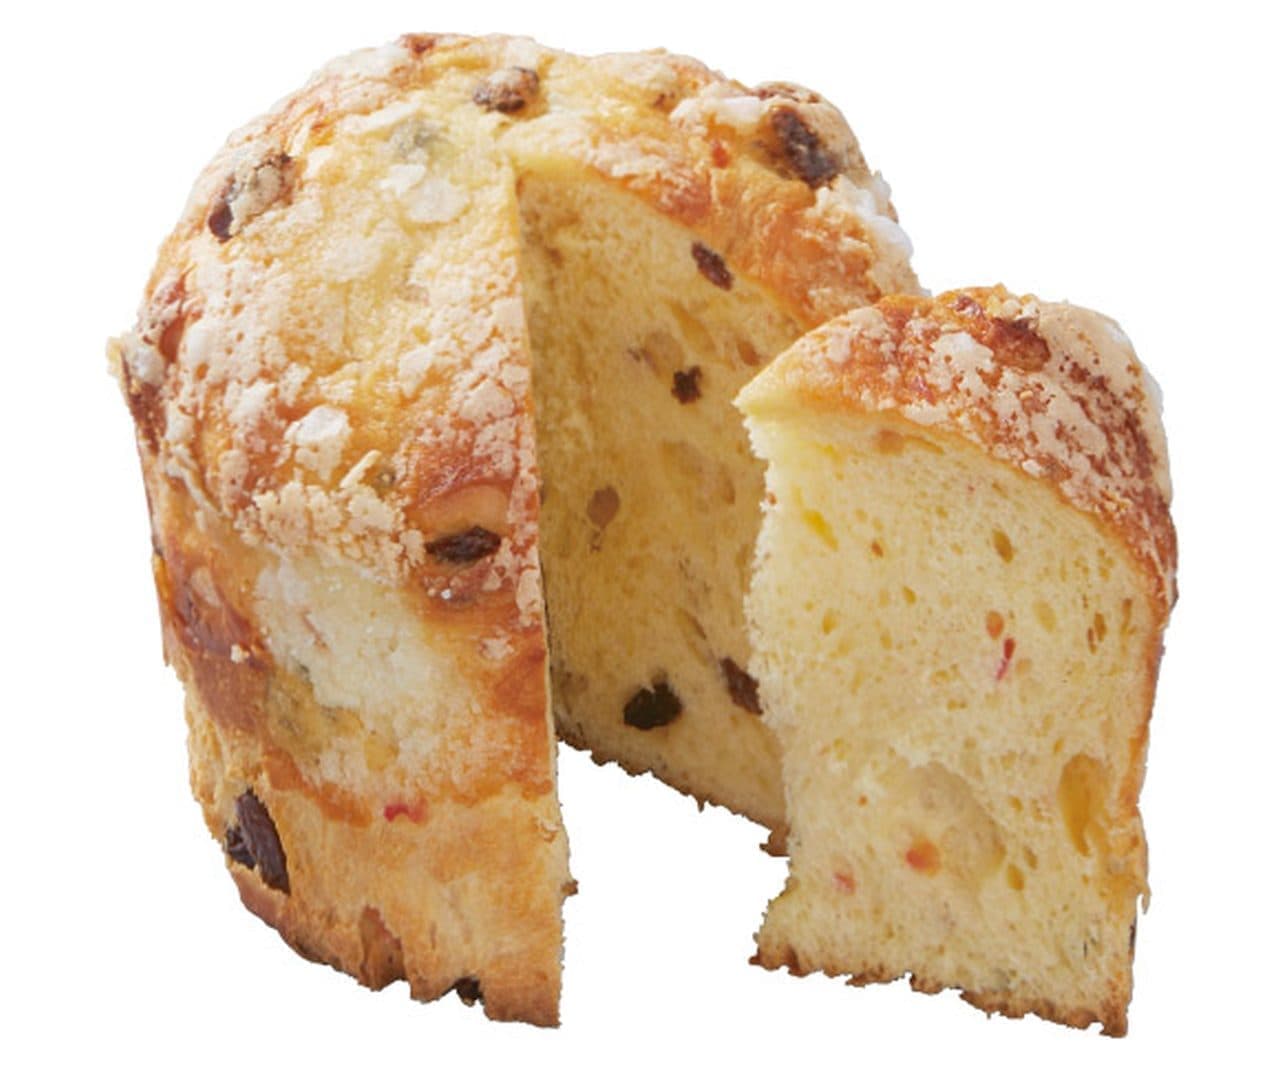 Chateraise "Xmas Panettone"